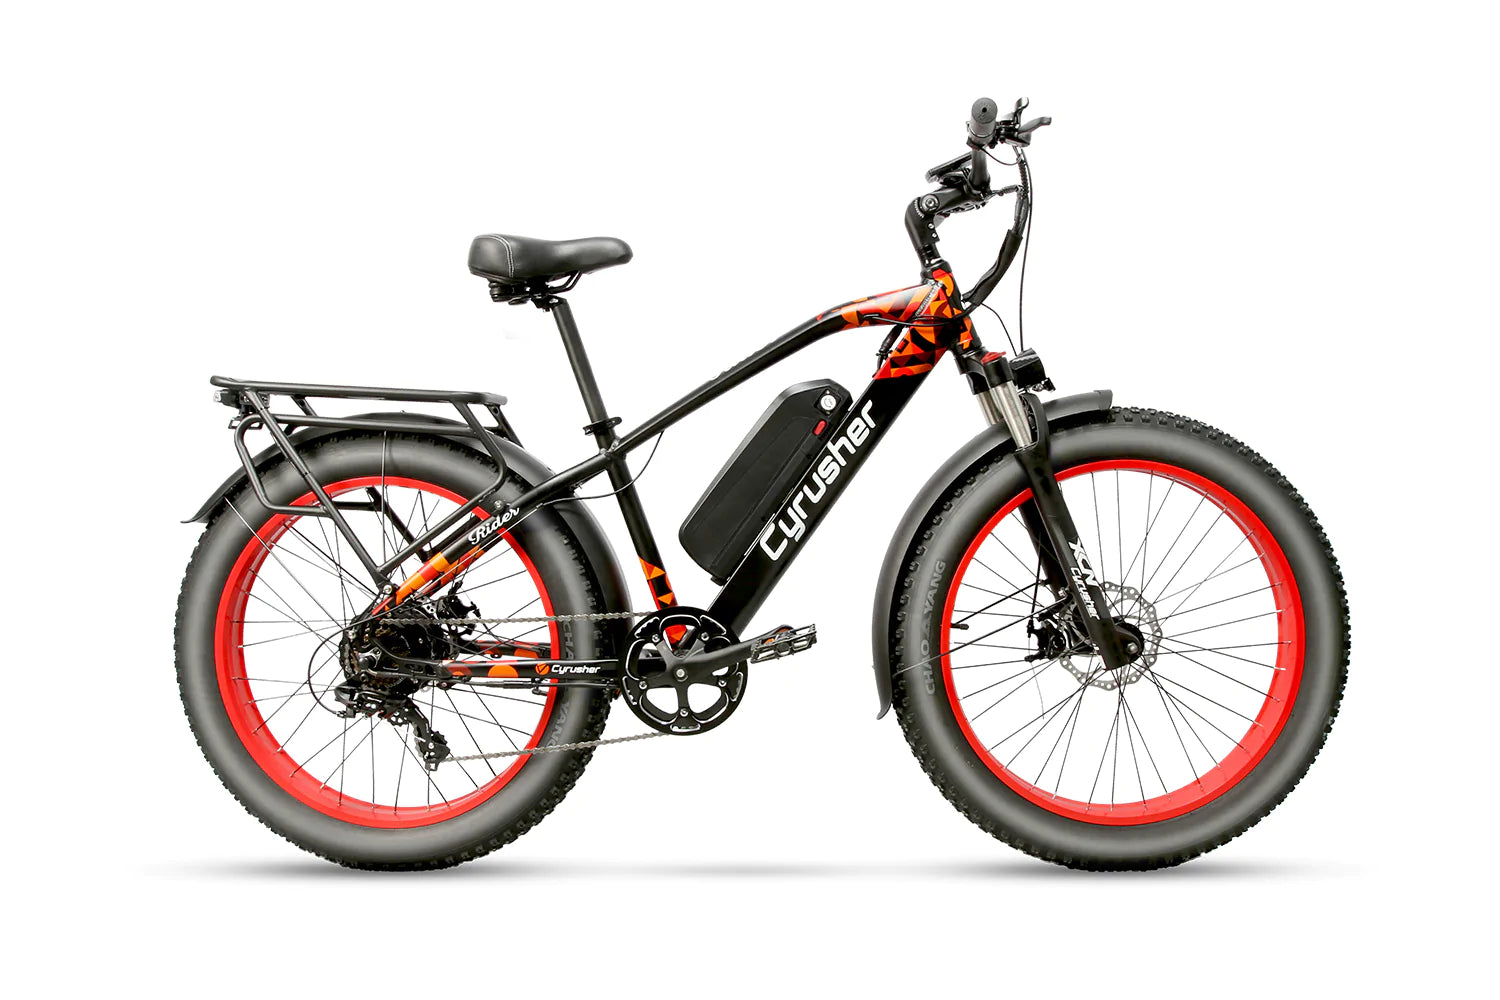 Cysrusher XF650 Hardtail Electric Bike - Pogo cycles UK -cycle to work scheme available